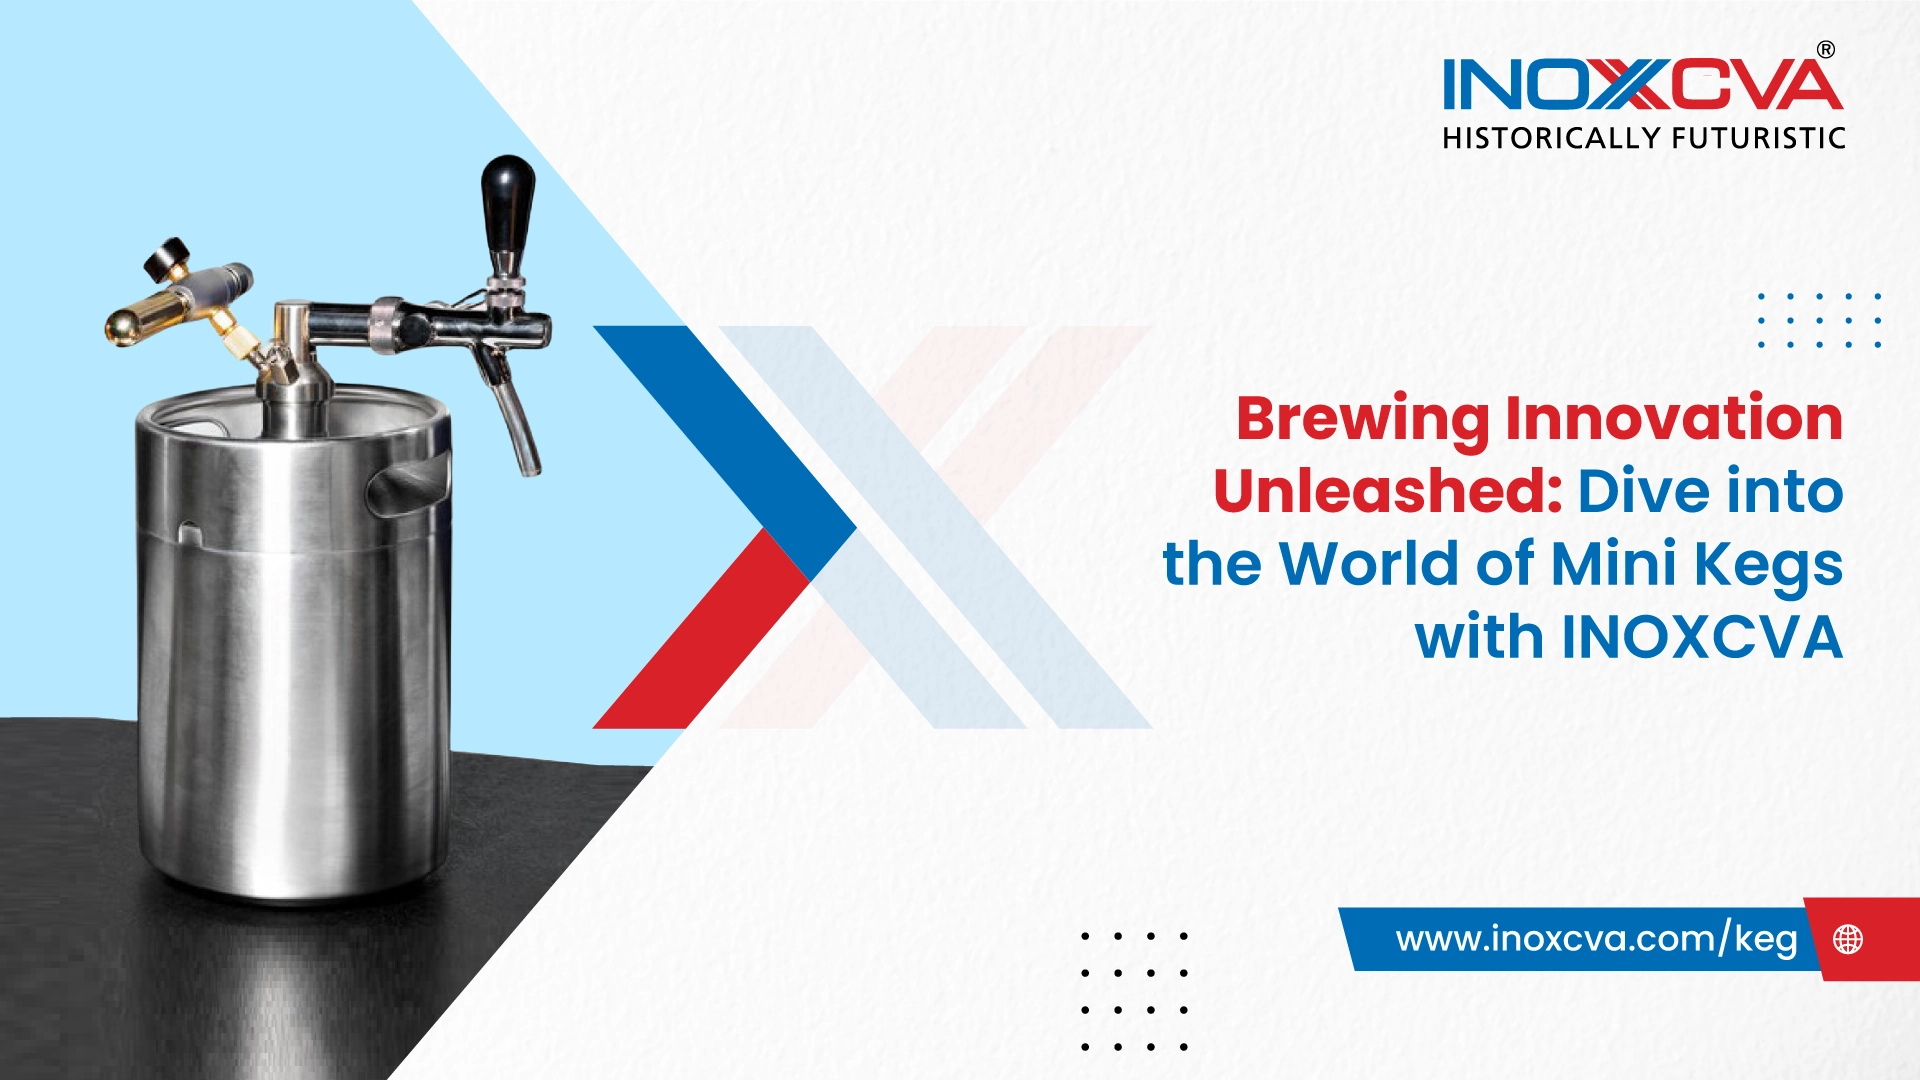 Brewing Innovation Unleashed: Dive into the World of Mini Kegs with INOXCVA
